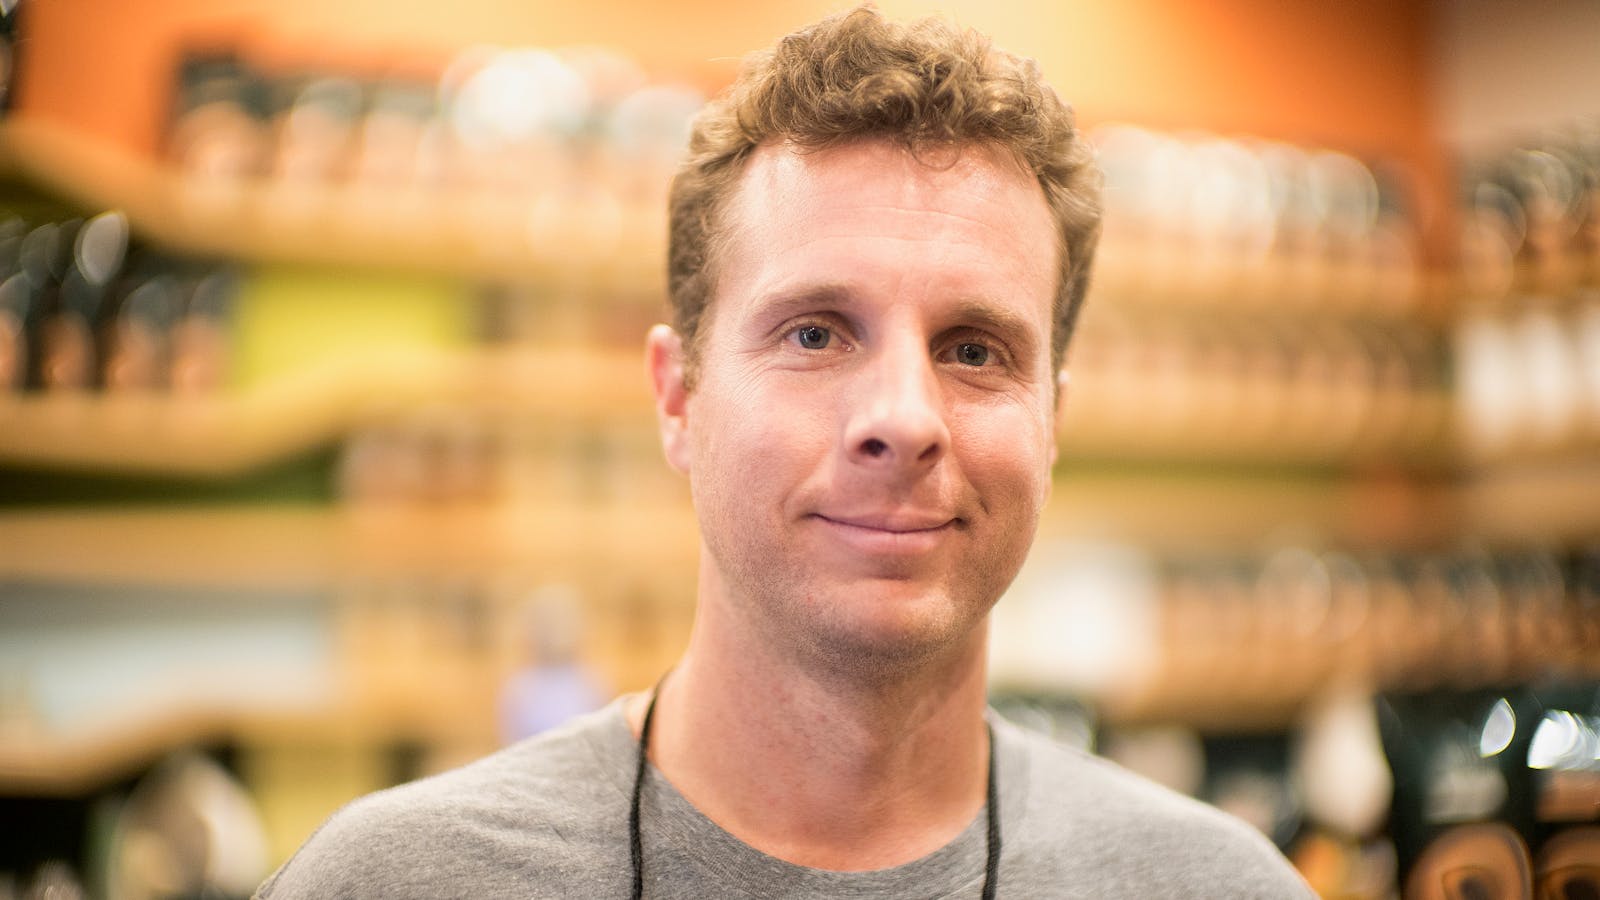 Ring CEO Jamie Siminoff. Photo by Flickr/Christopher Michel